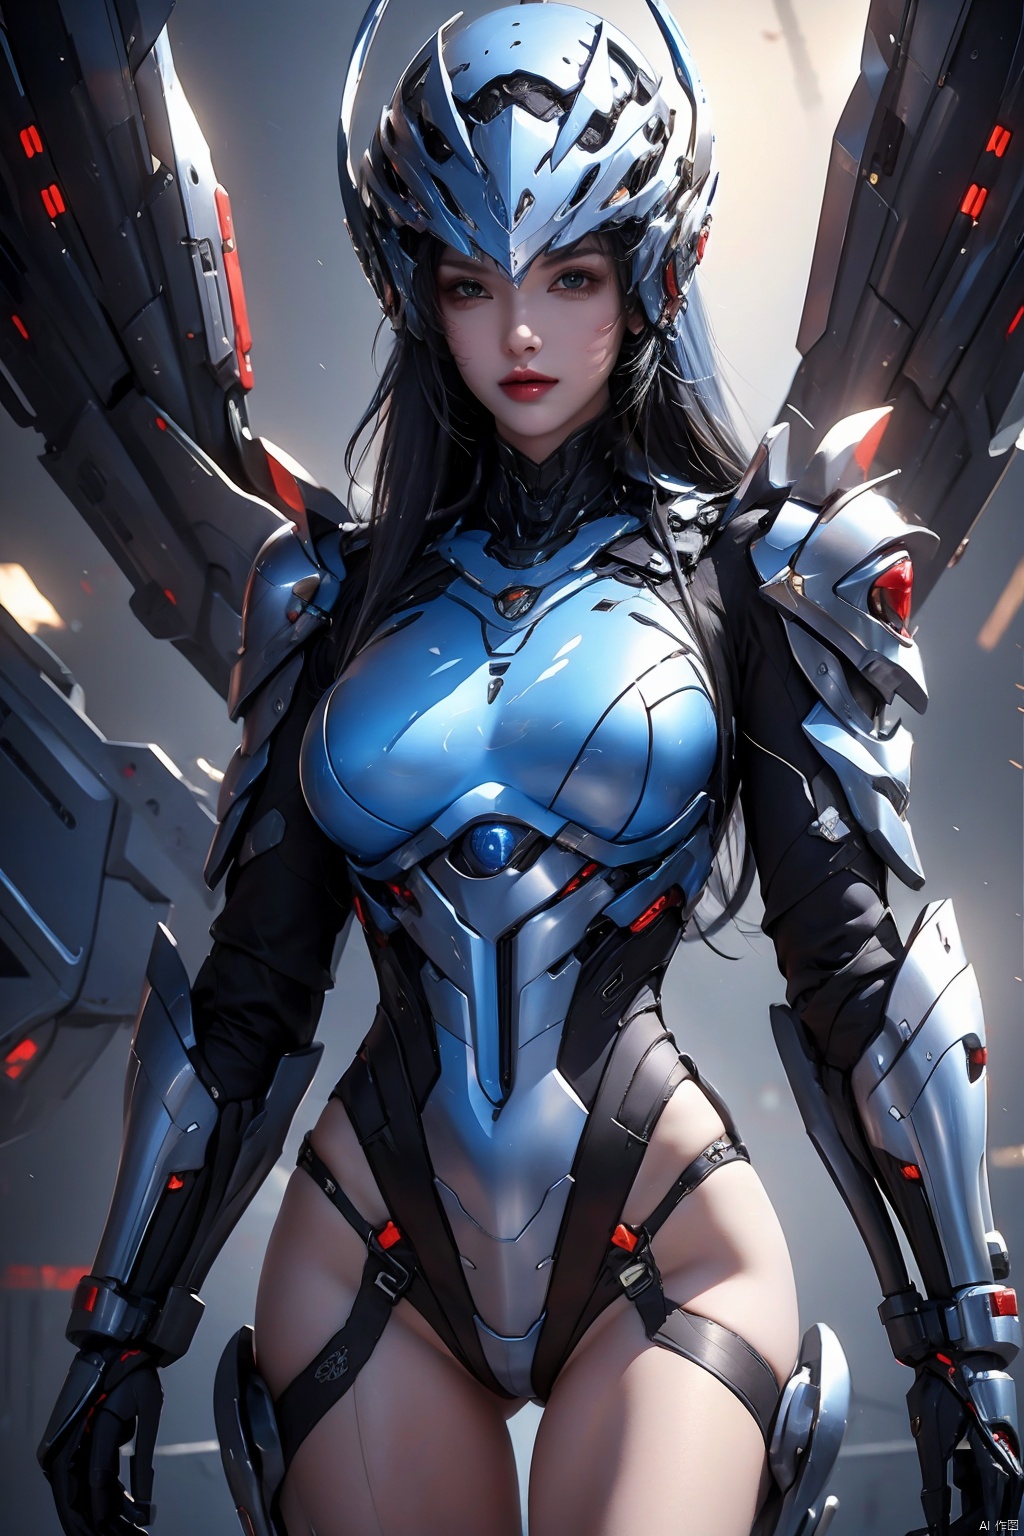  1 girl, science fiction armor,sexy,thighs,naked, fantasy